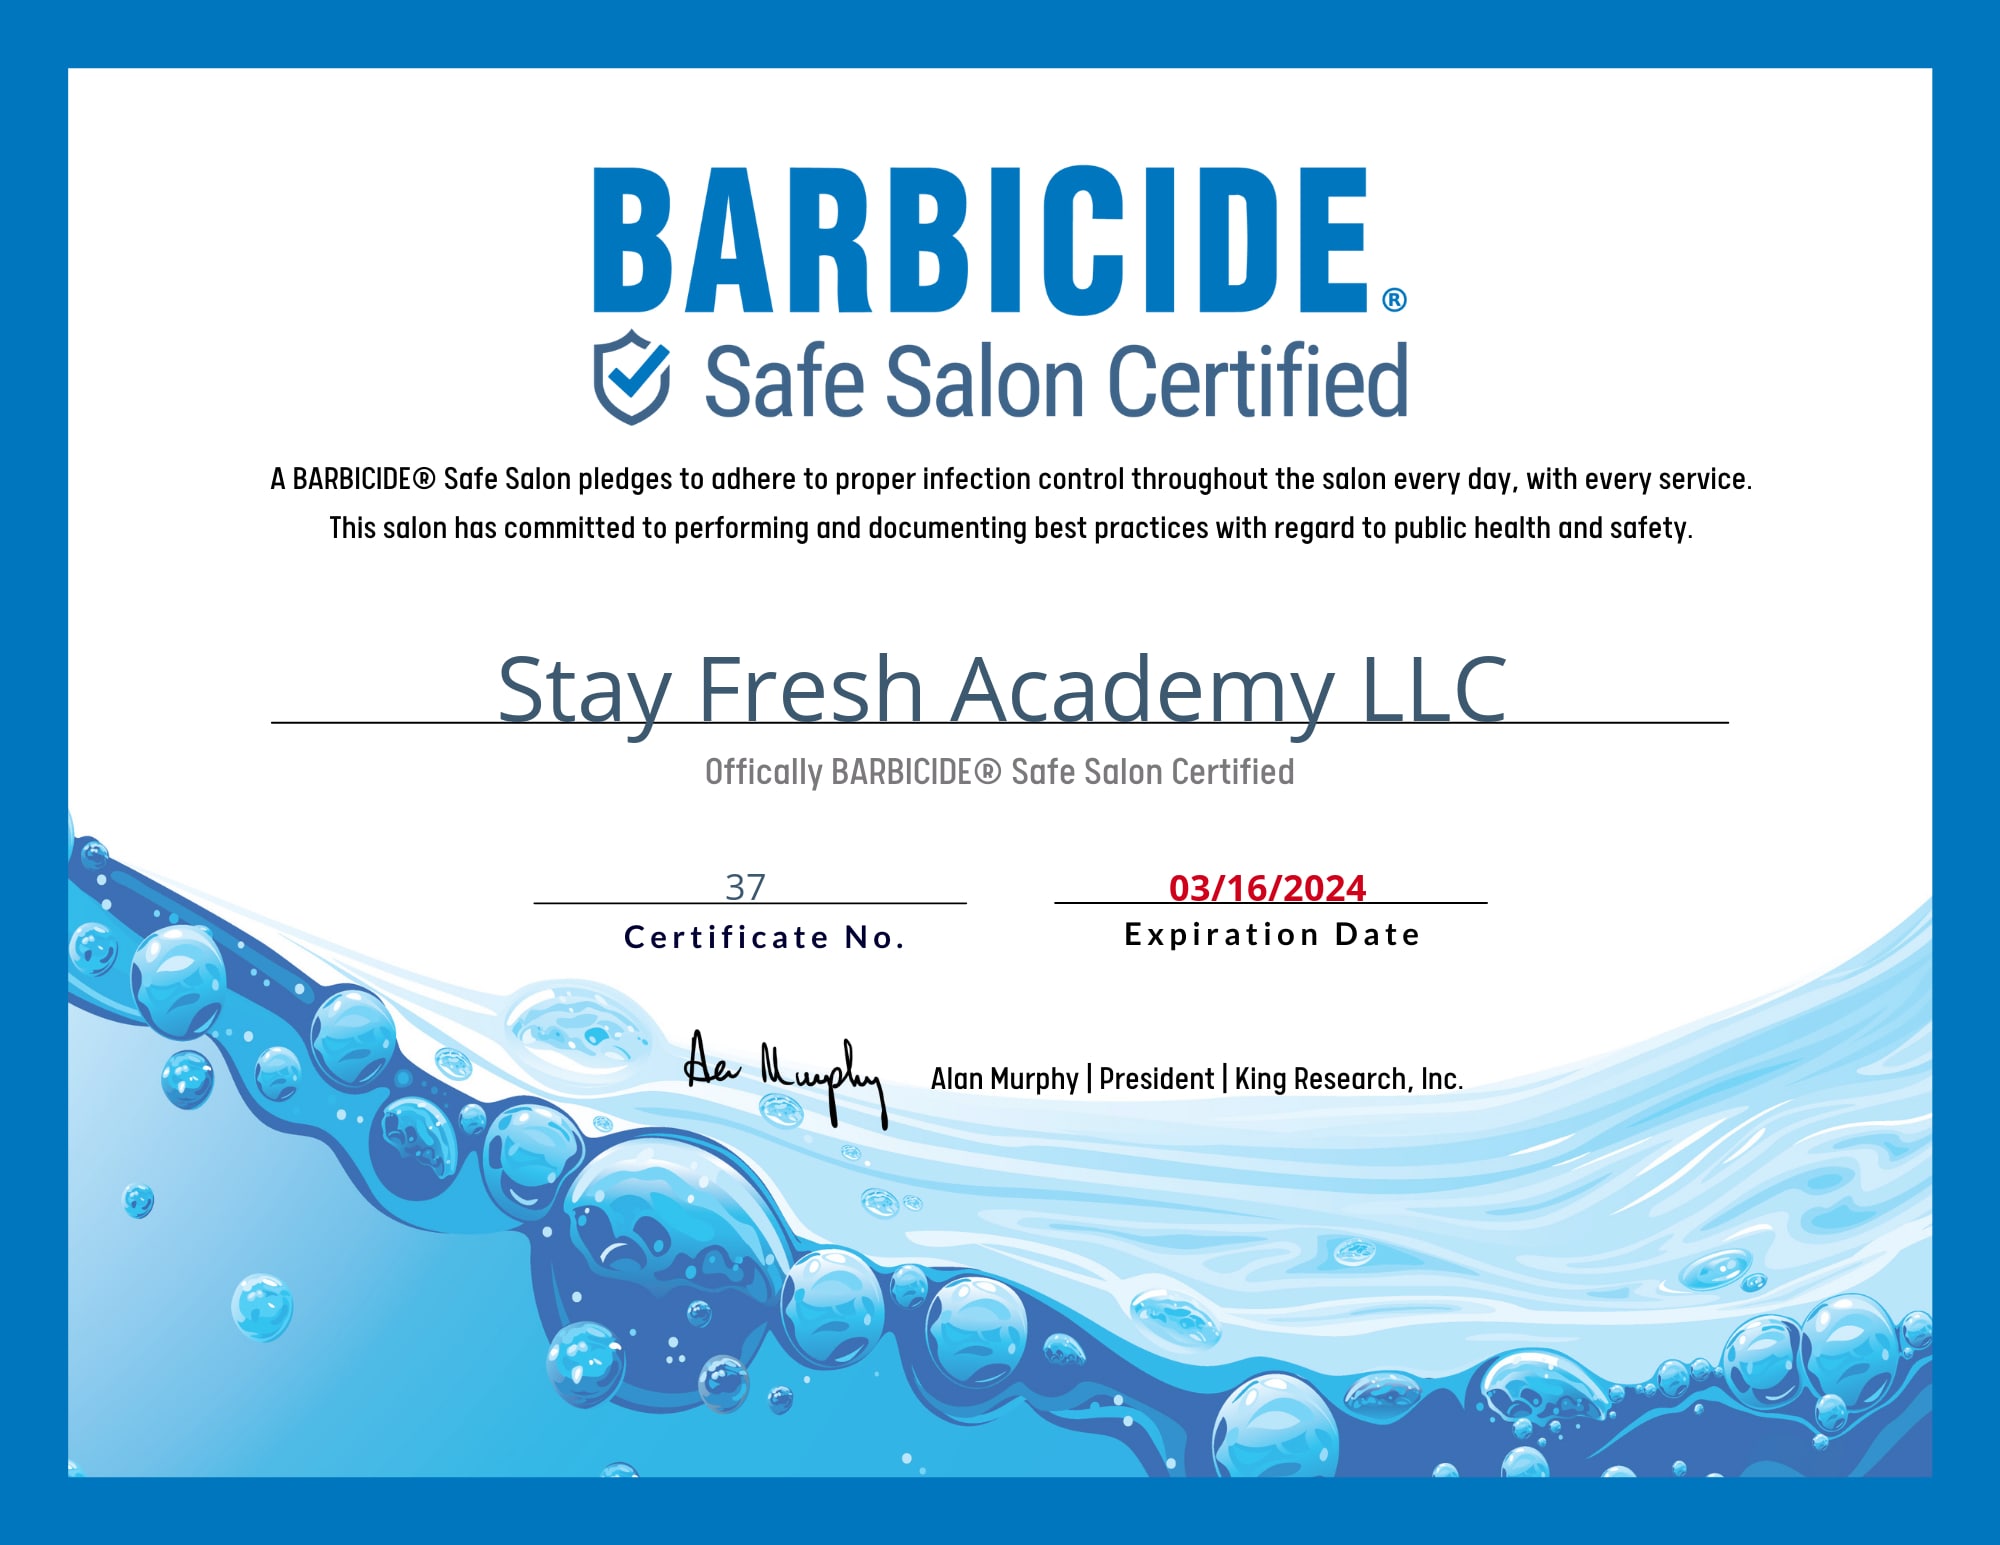 Digital certificate for a Safe Shop Certified merit sent to Stay Fresh Academy LLC from Safe Shop Certified